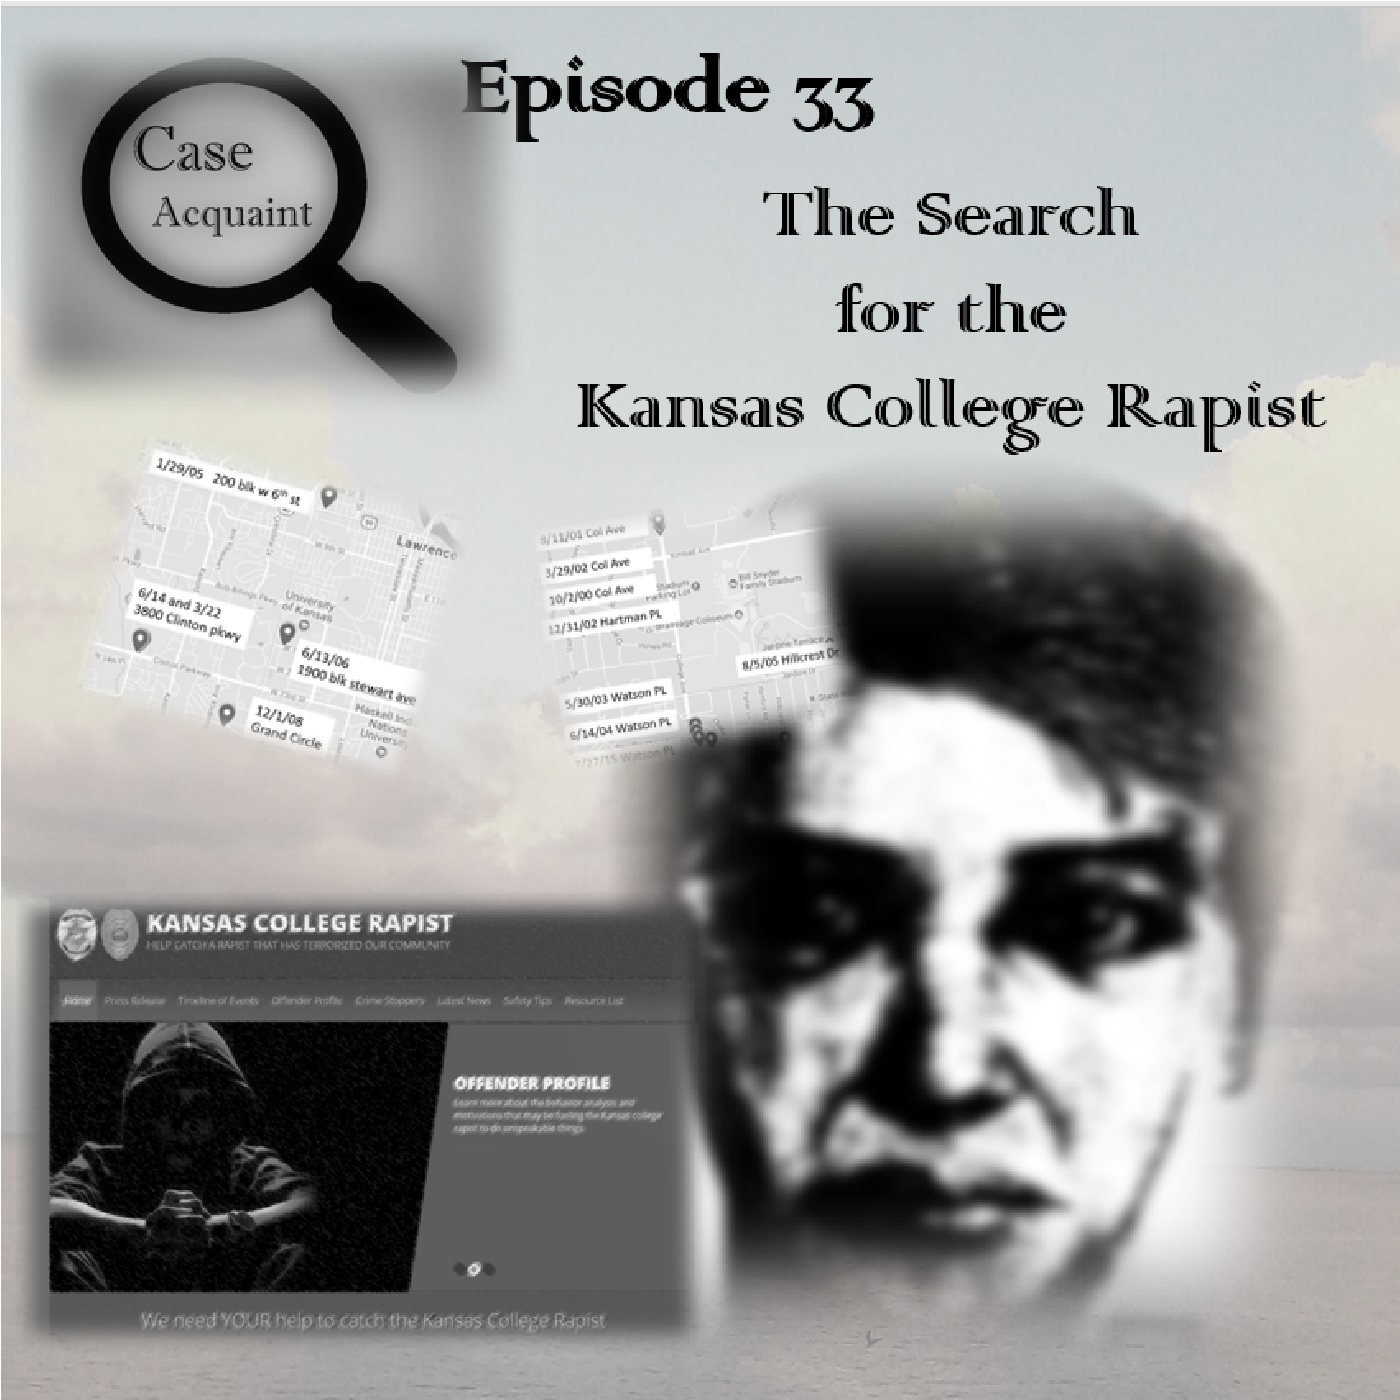 Episode 33 The Search for the Kansas College Rapist